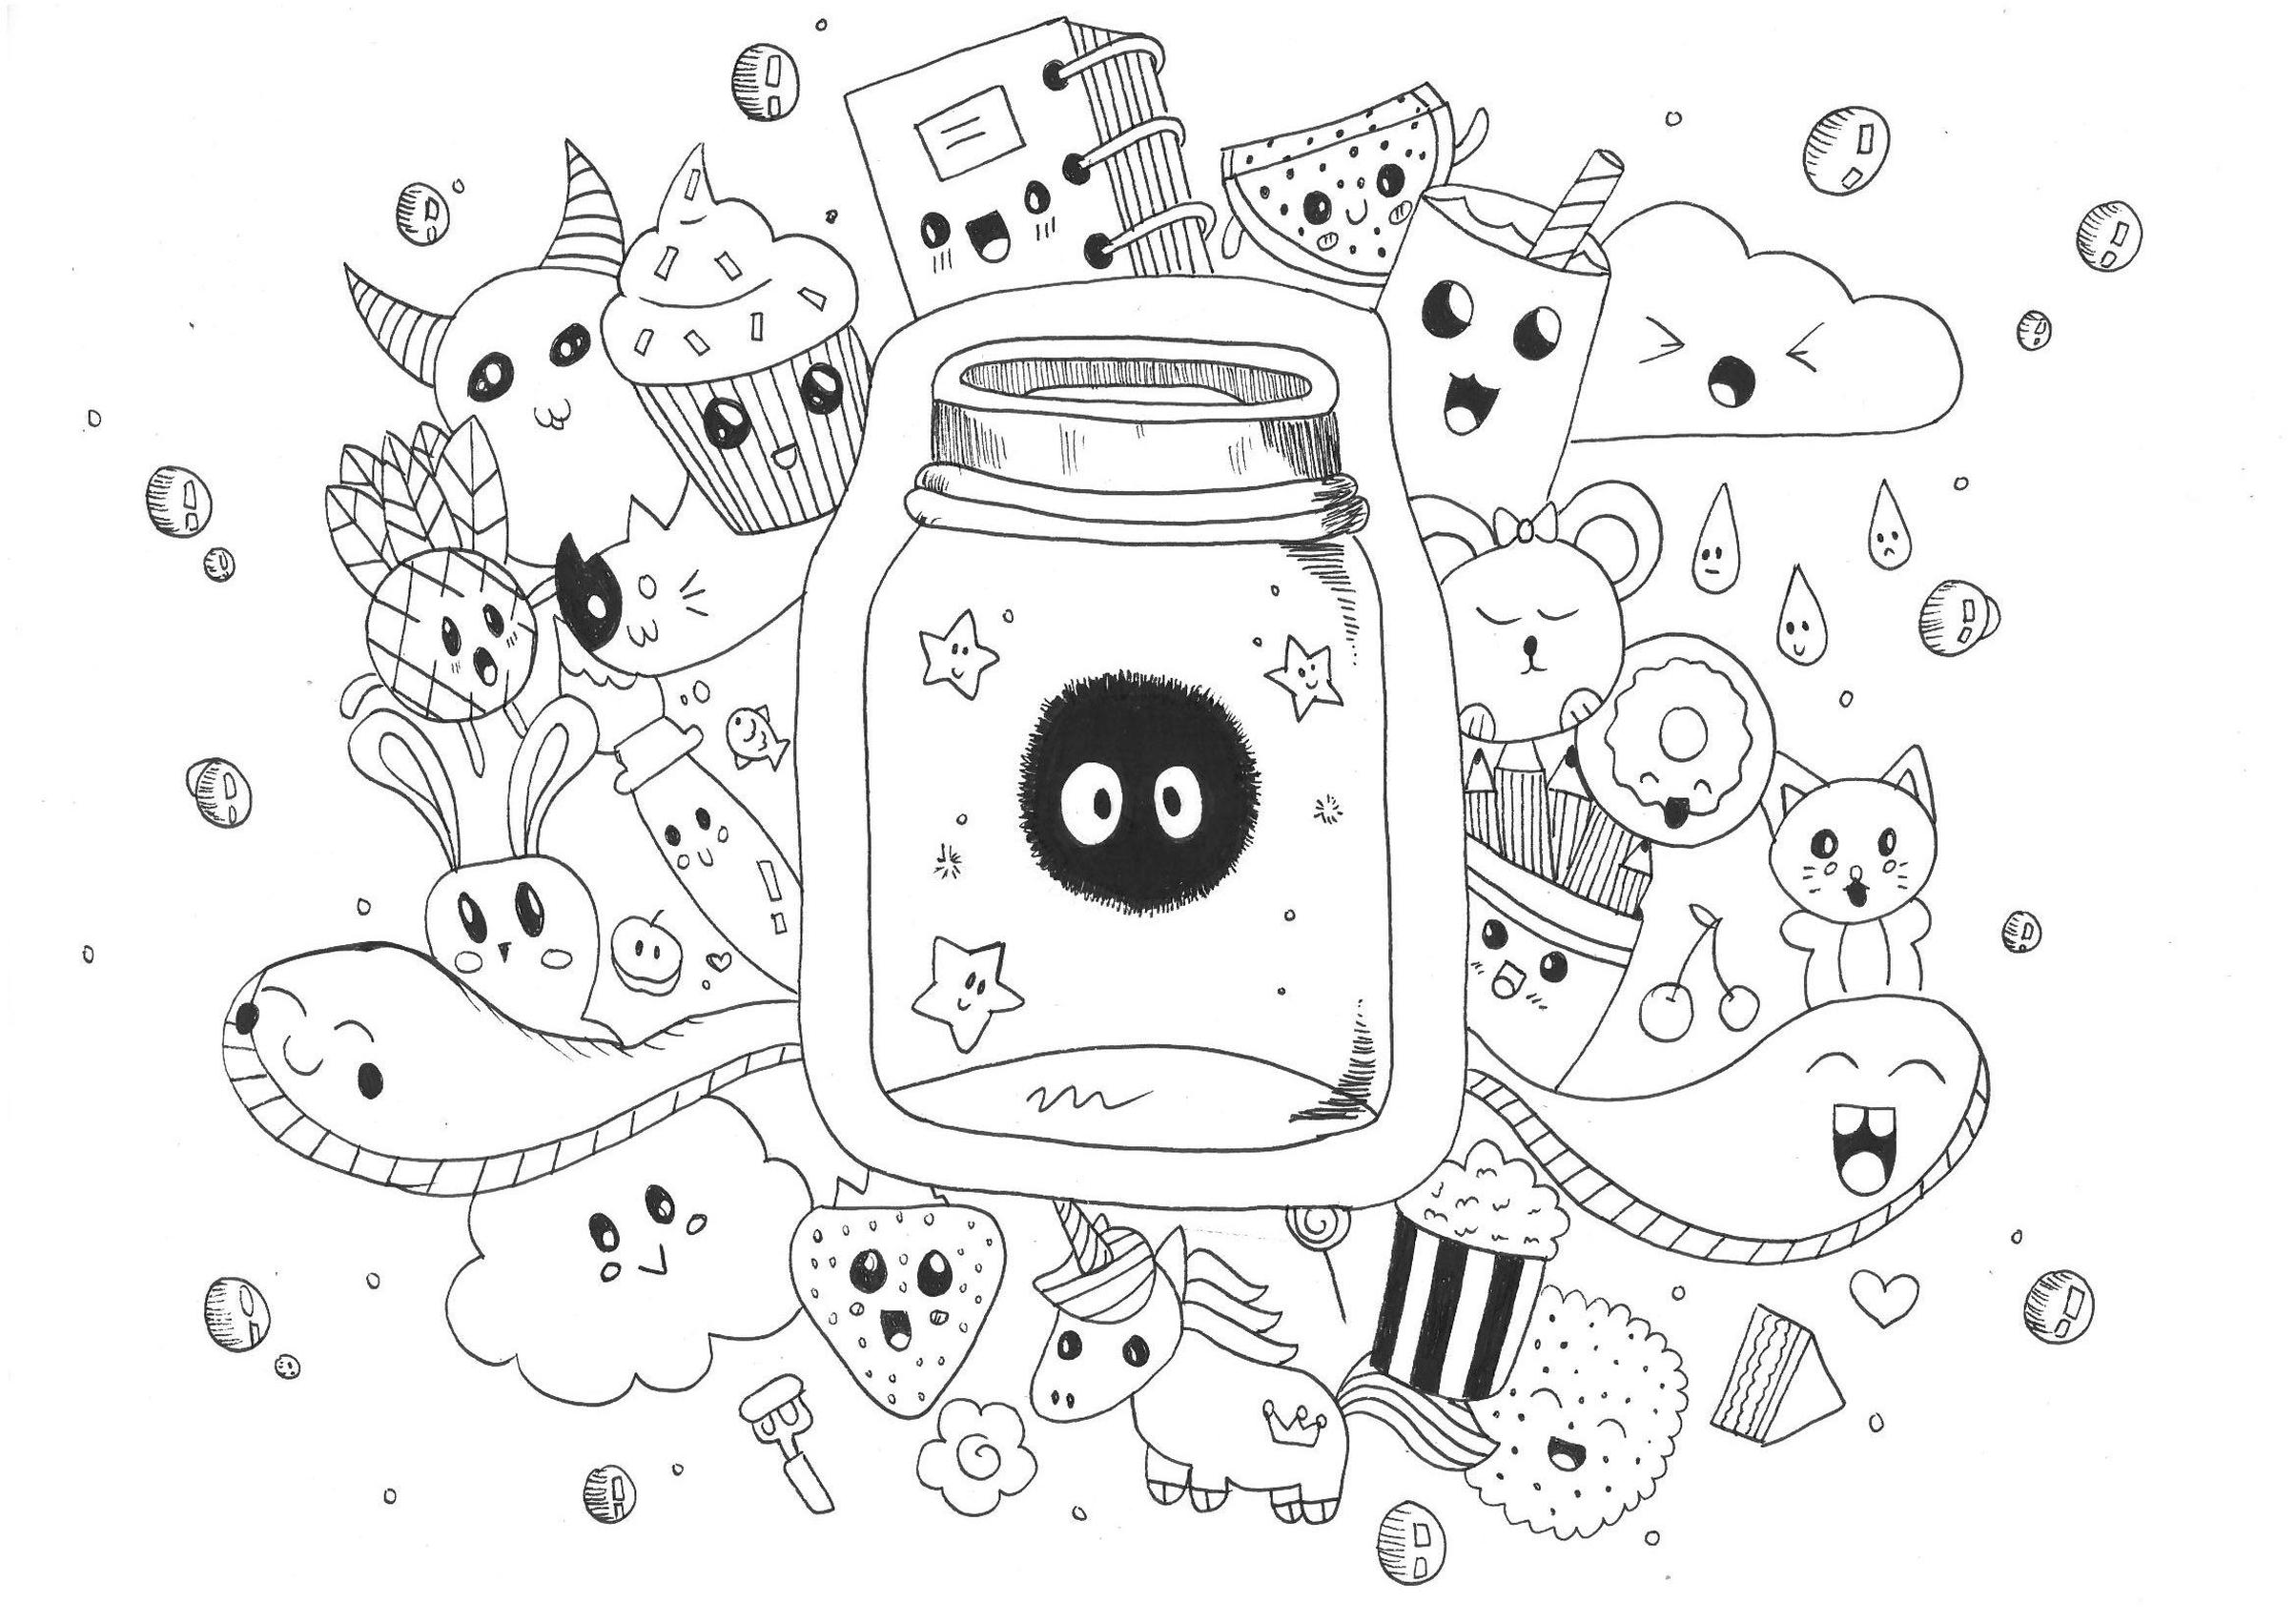 Get This Kawaii Doodle Art Coloring Pages for Grown Ups